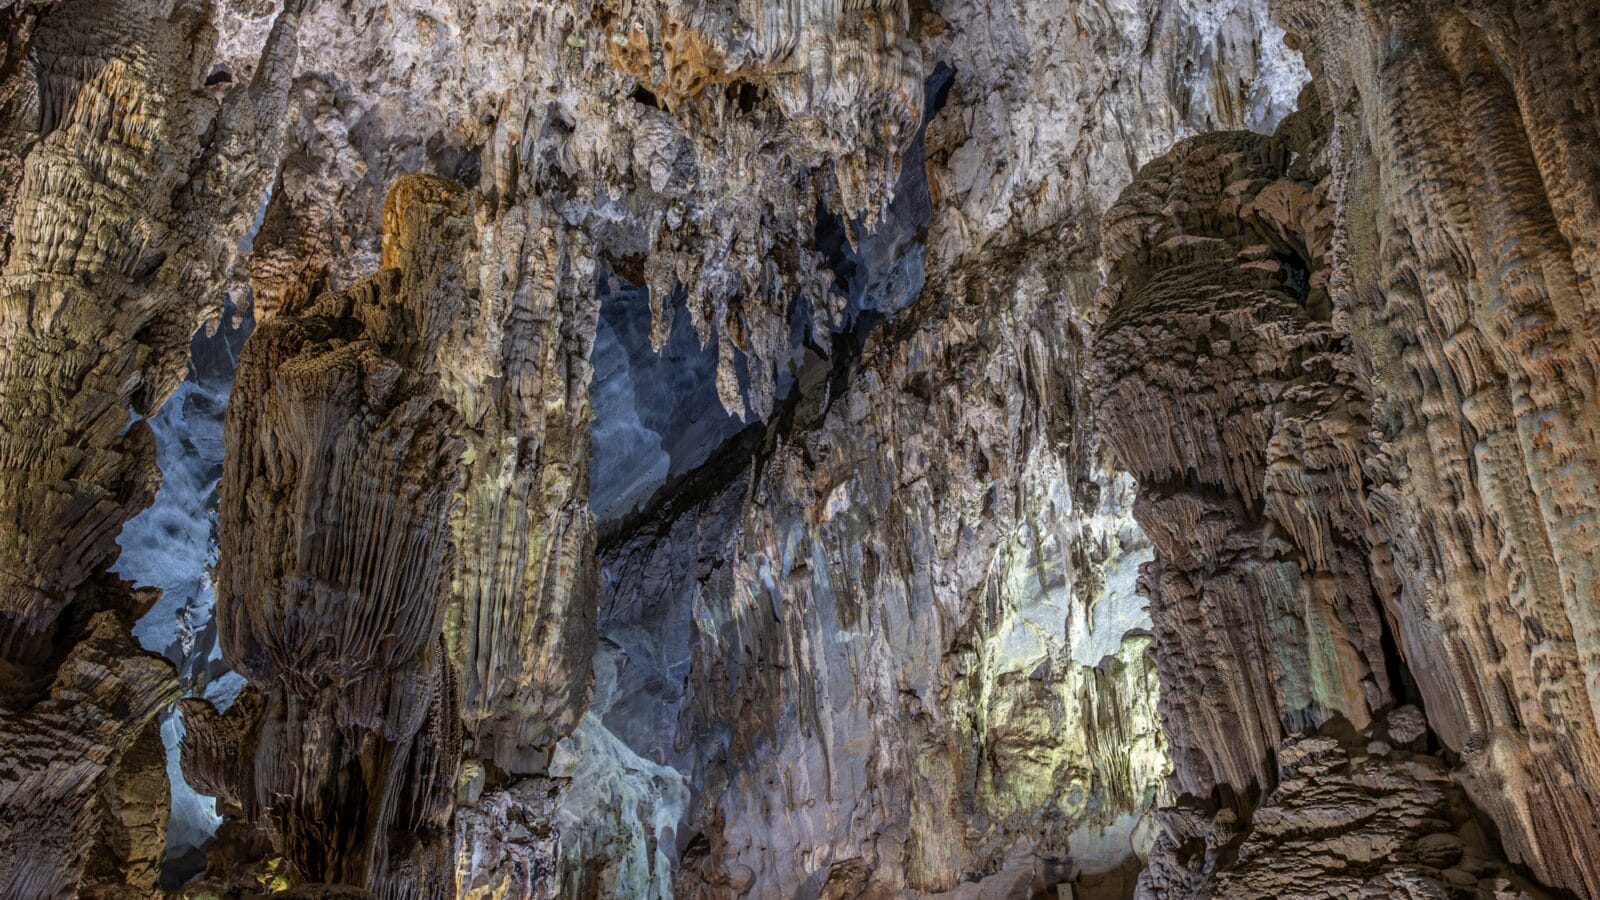 <p>Vietnam’s Hang Sơn Đoòng is one of the largest caves in the world, and it is lightened up by natural skylights in some locations. The fairytale cavern is also home to rather unusual flora and fauna. It boasts massive cave pearls bigger than anywhere else in the world.</p><p>If you want to explore Hang Sơn Đoòng and its fossils dating back to the Paleozoic era, be ready to pay a whopping $3,000 per person for the tour of this natural wonder.</p>